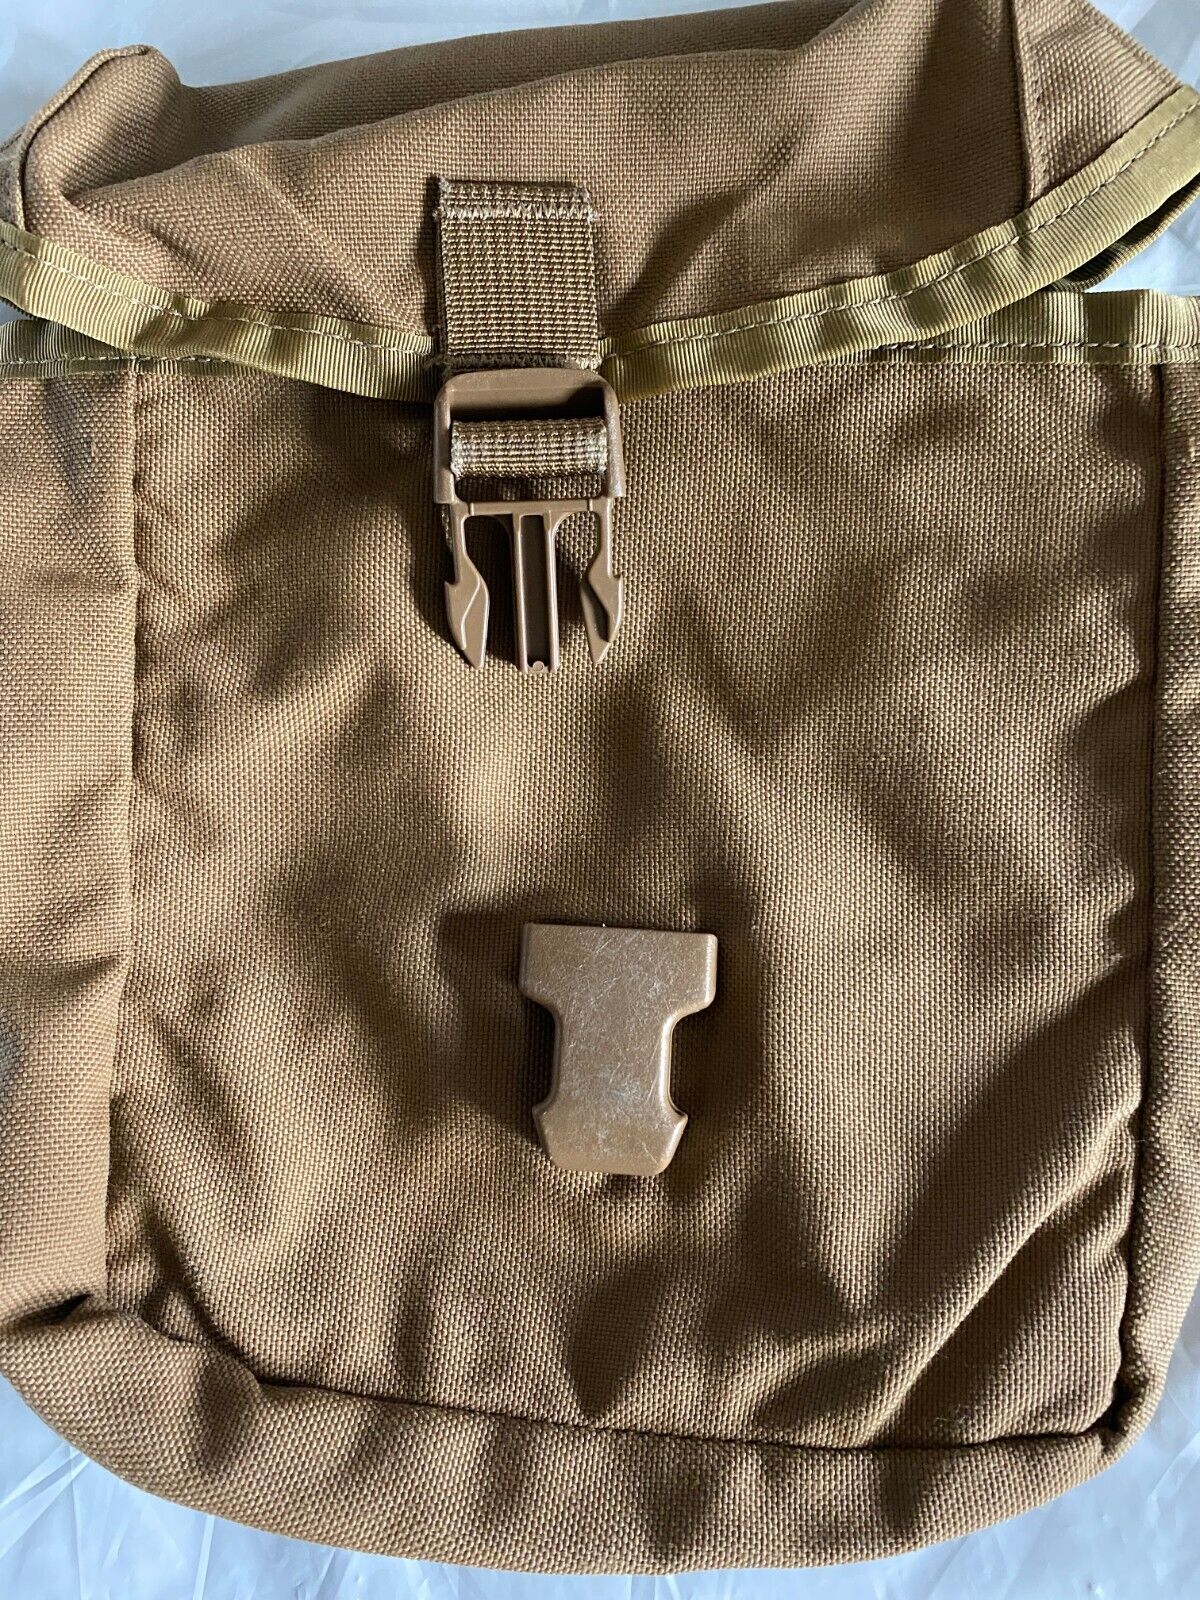 MOLLE II IFAK A-1 First Aid Utility Pouch Coyote Brown fs